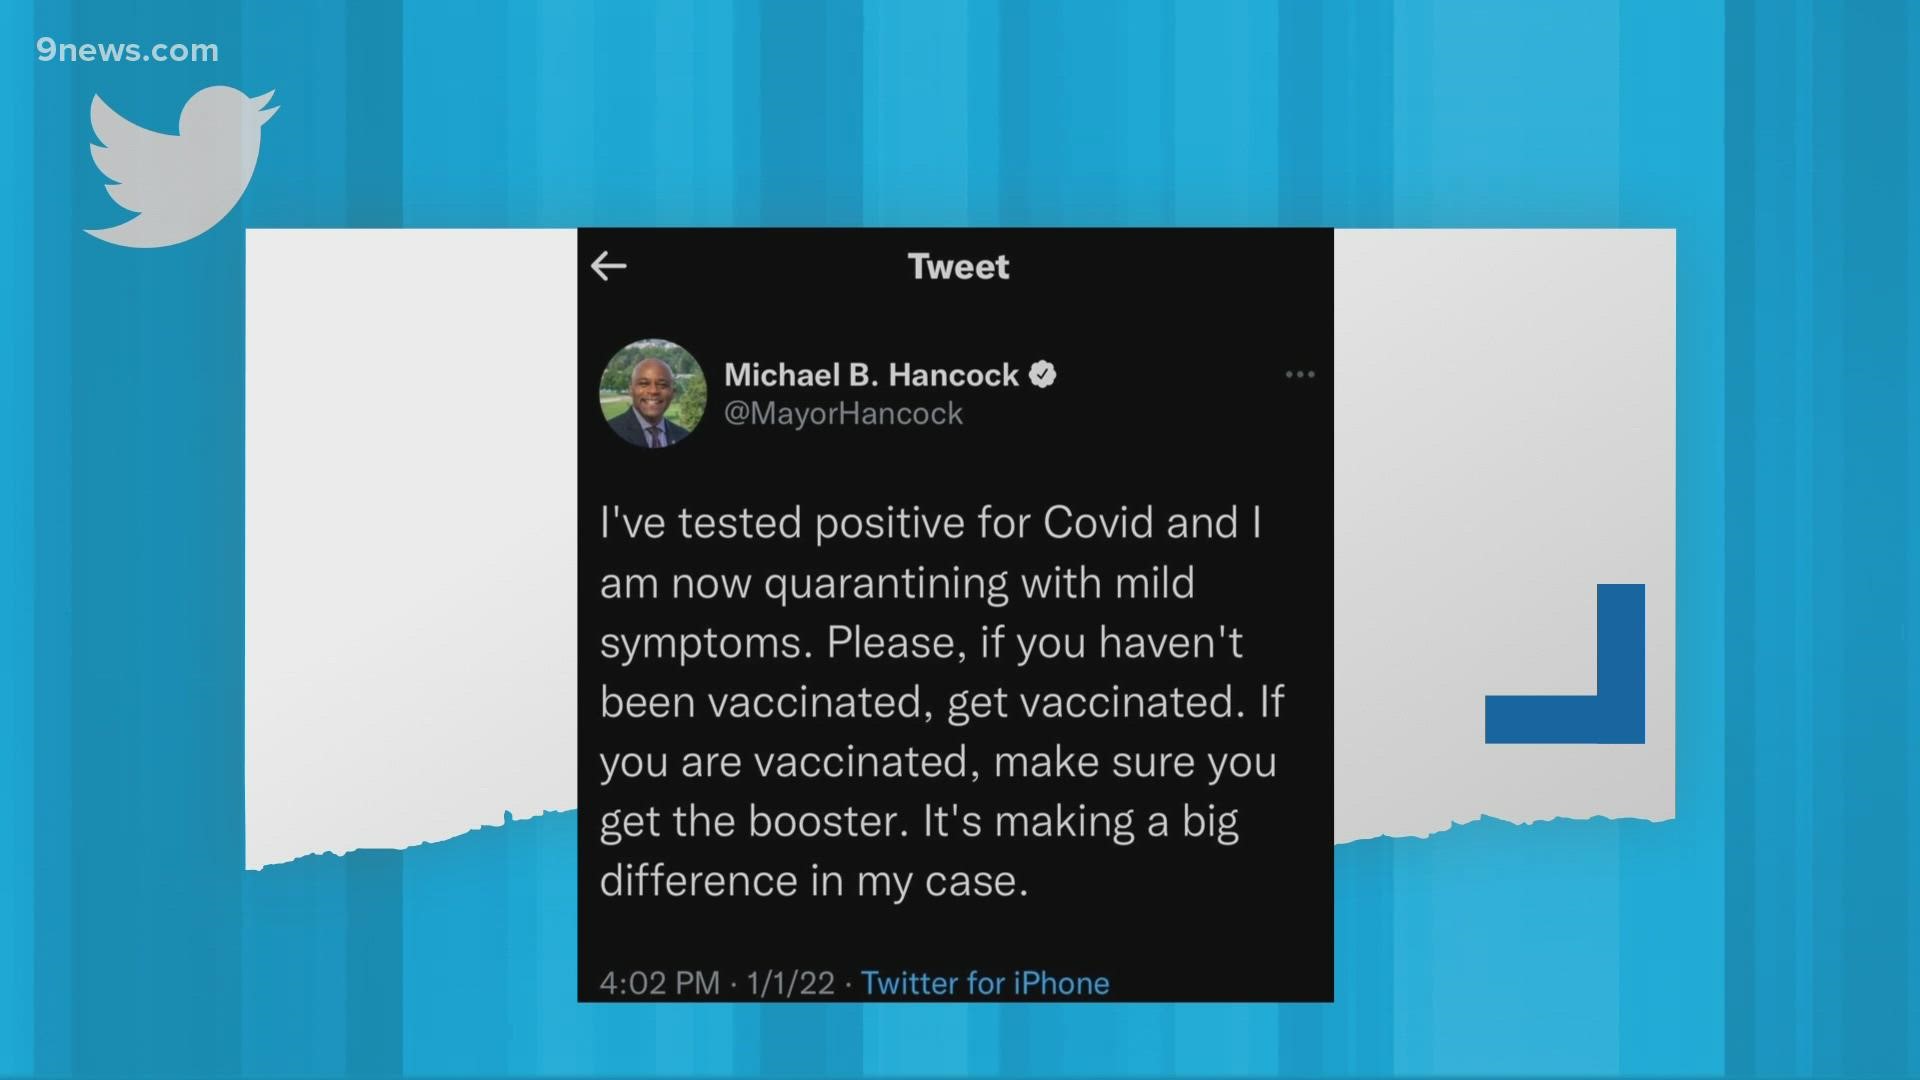 Denver Mayor Michael Hancock said on Saturday he is quarantining and experiencing mild symptoms after testing positive for COVID-19.